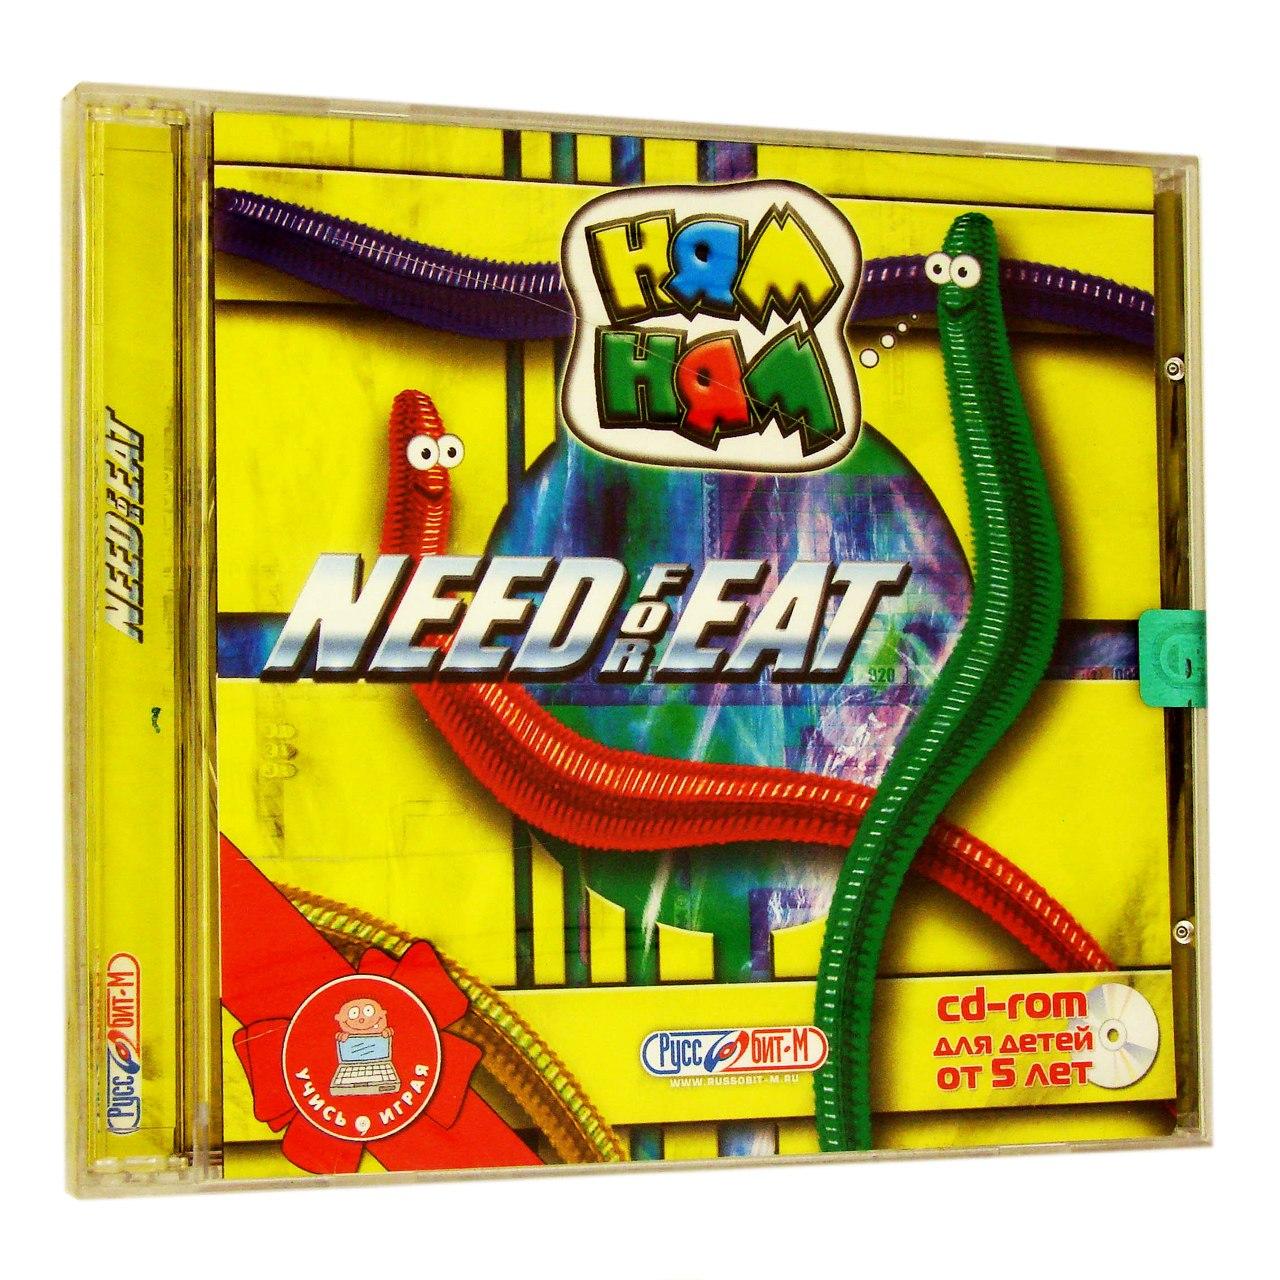  - Need for Eat (PC),  "-", 2CD